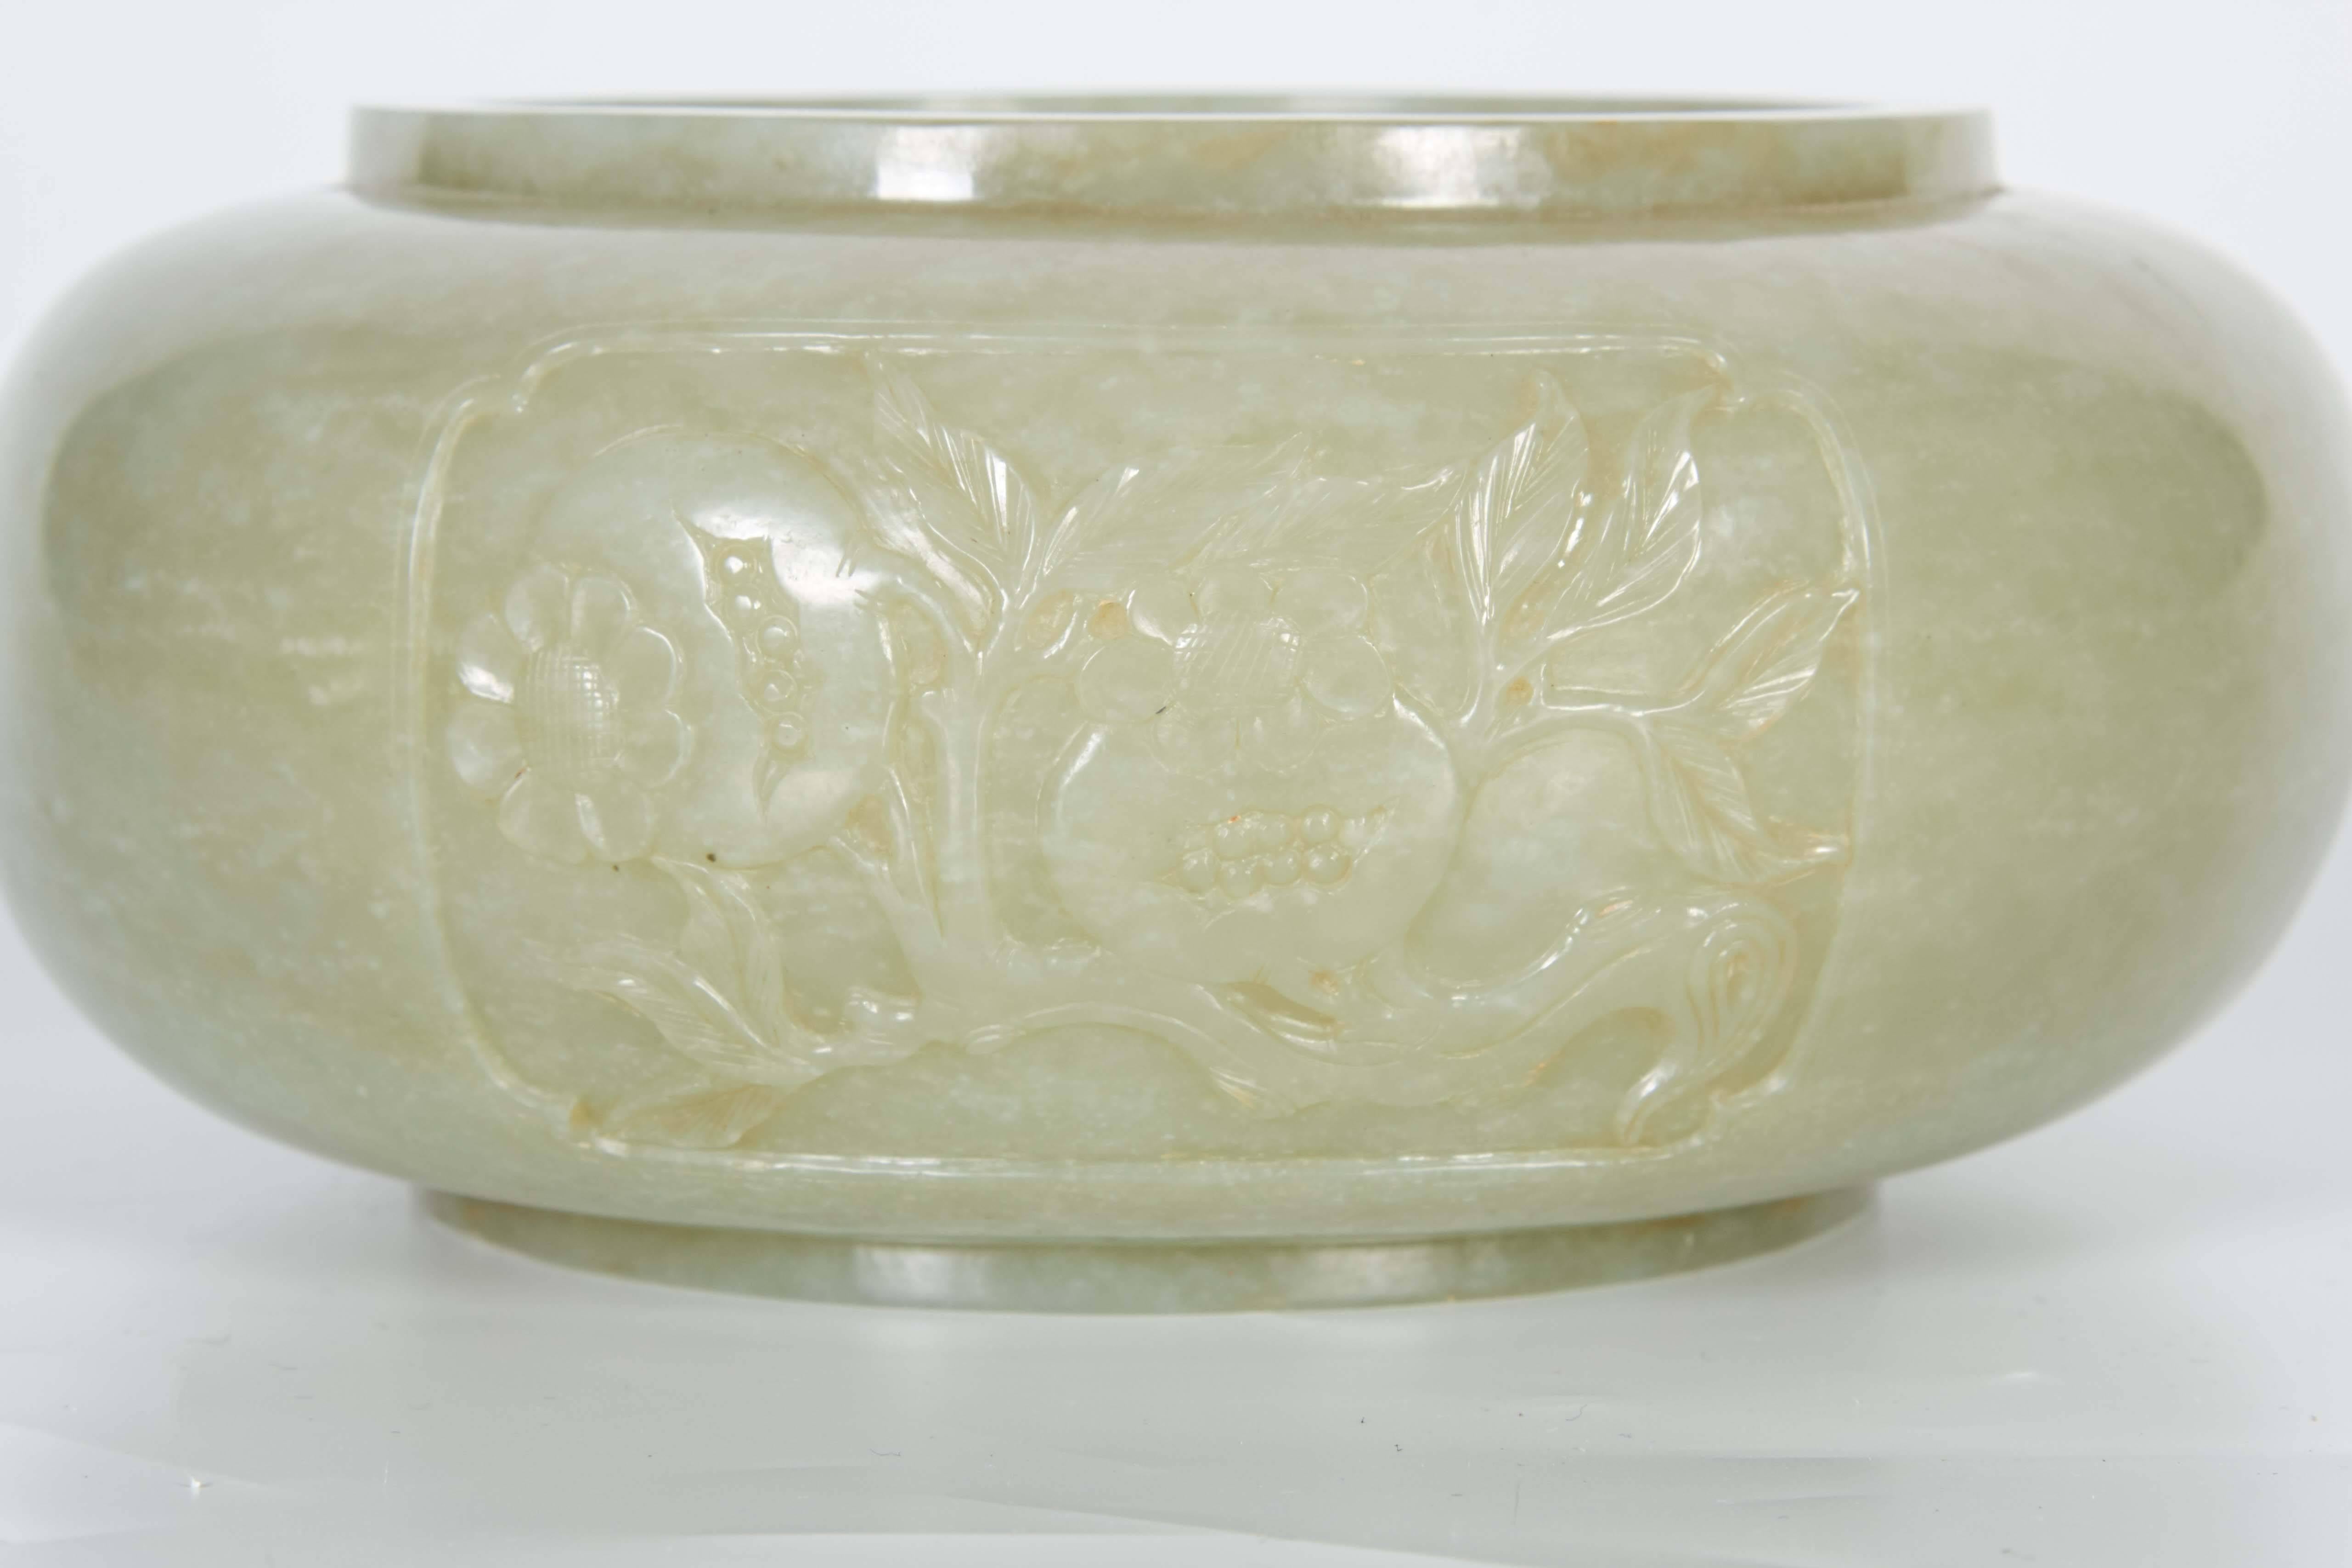 A quite rare 18-19th century Chinese hand carved globular shape alms jade bowl, hand carved with relief panels of sacred fruit. With a beautiful celadon color, this jade bowl has been beautifully hand carved with exceptional craftsmanship. Each side